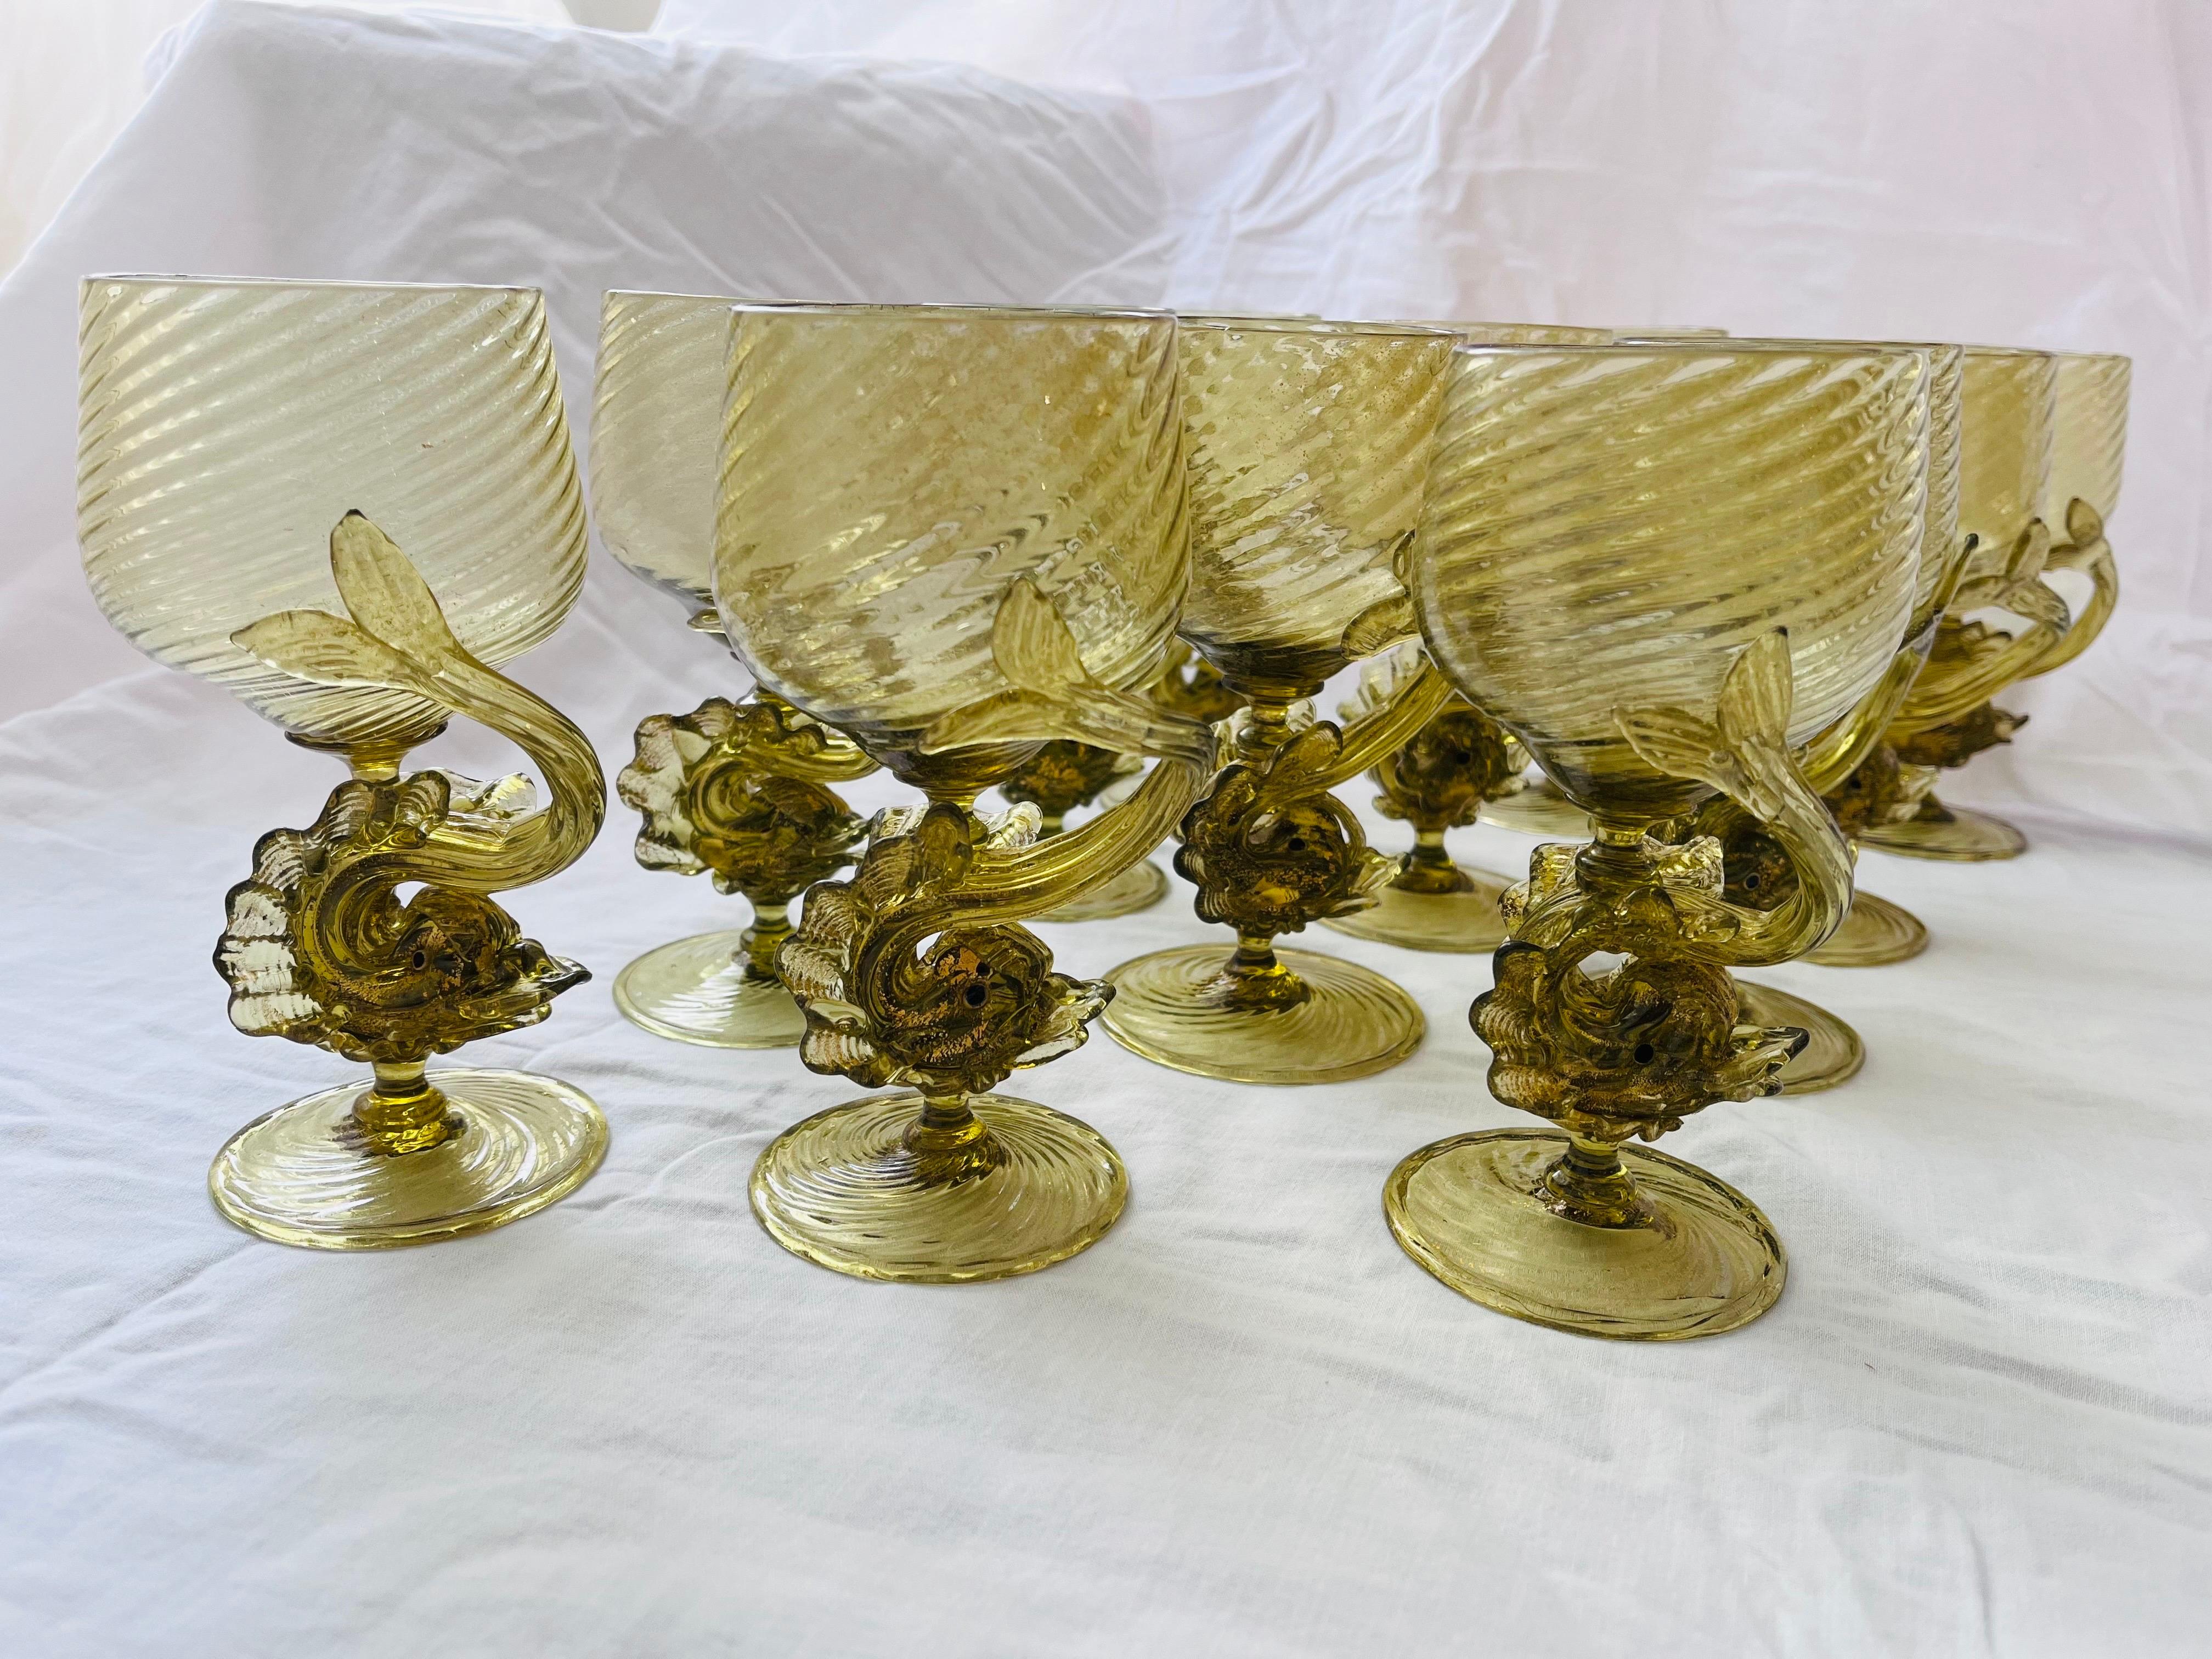 A beautifully ornate set of twelve Antonio Salviati style hand blown glass Venetian Murano style water or wine goblets. The stylized dolphins are the figural stem for each glass. The greenish / amber color is embellished by sparkly gold flecks